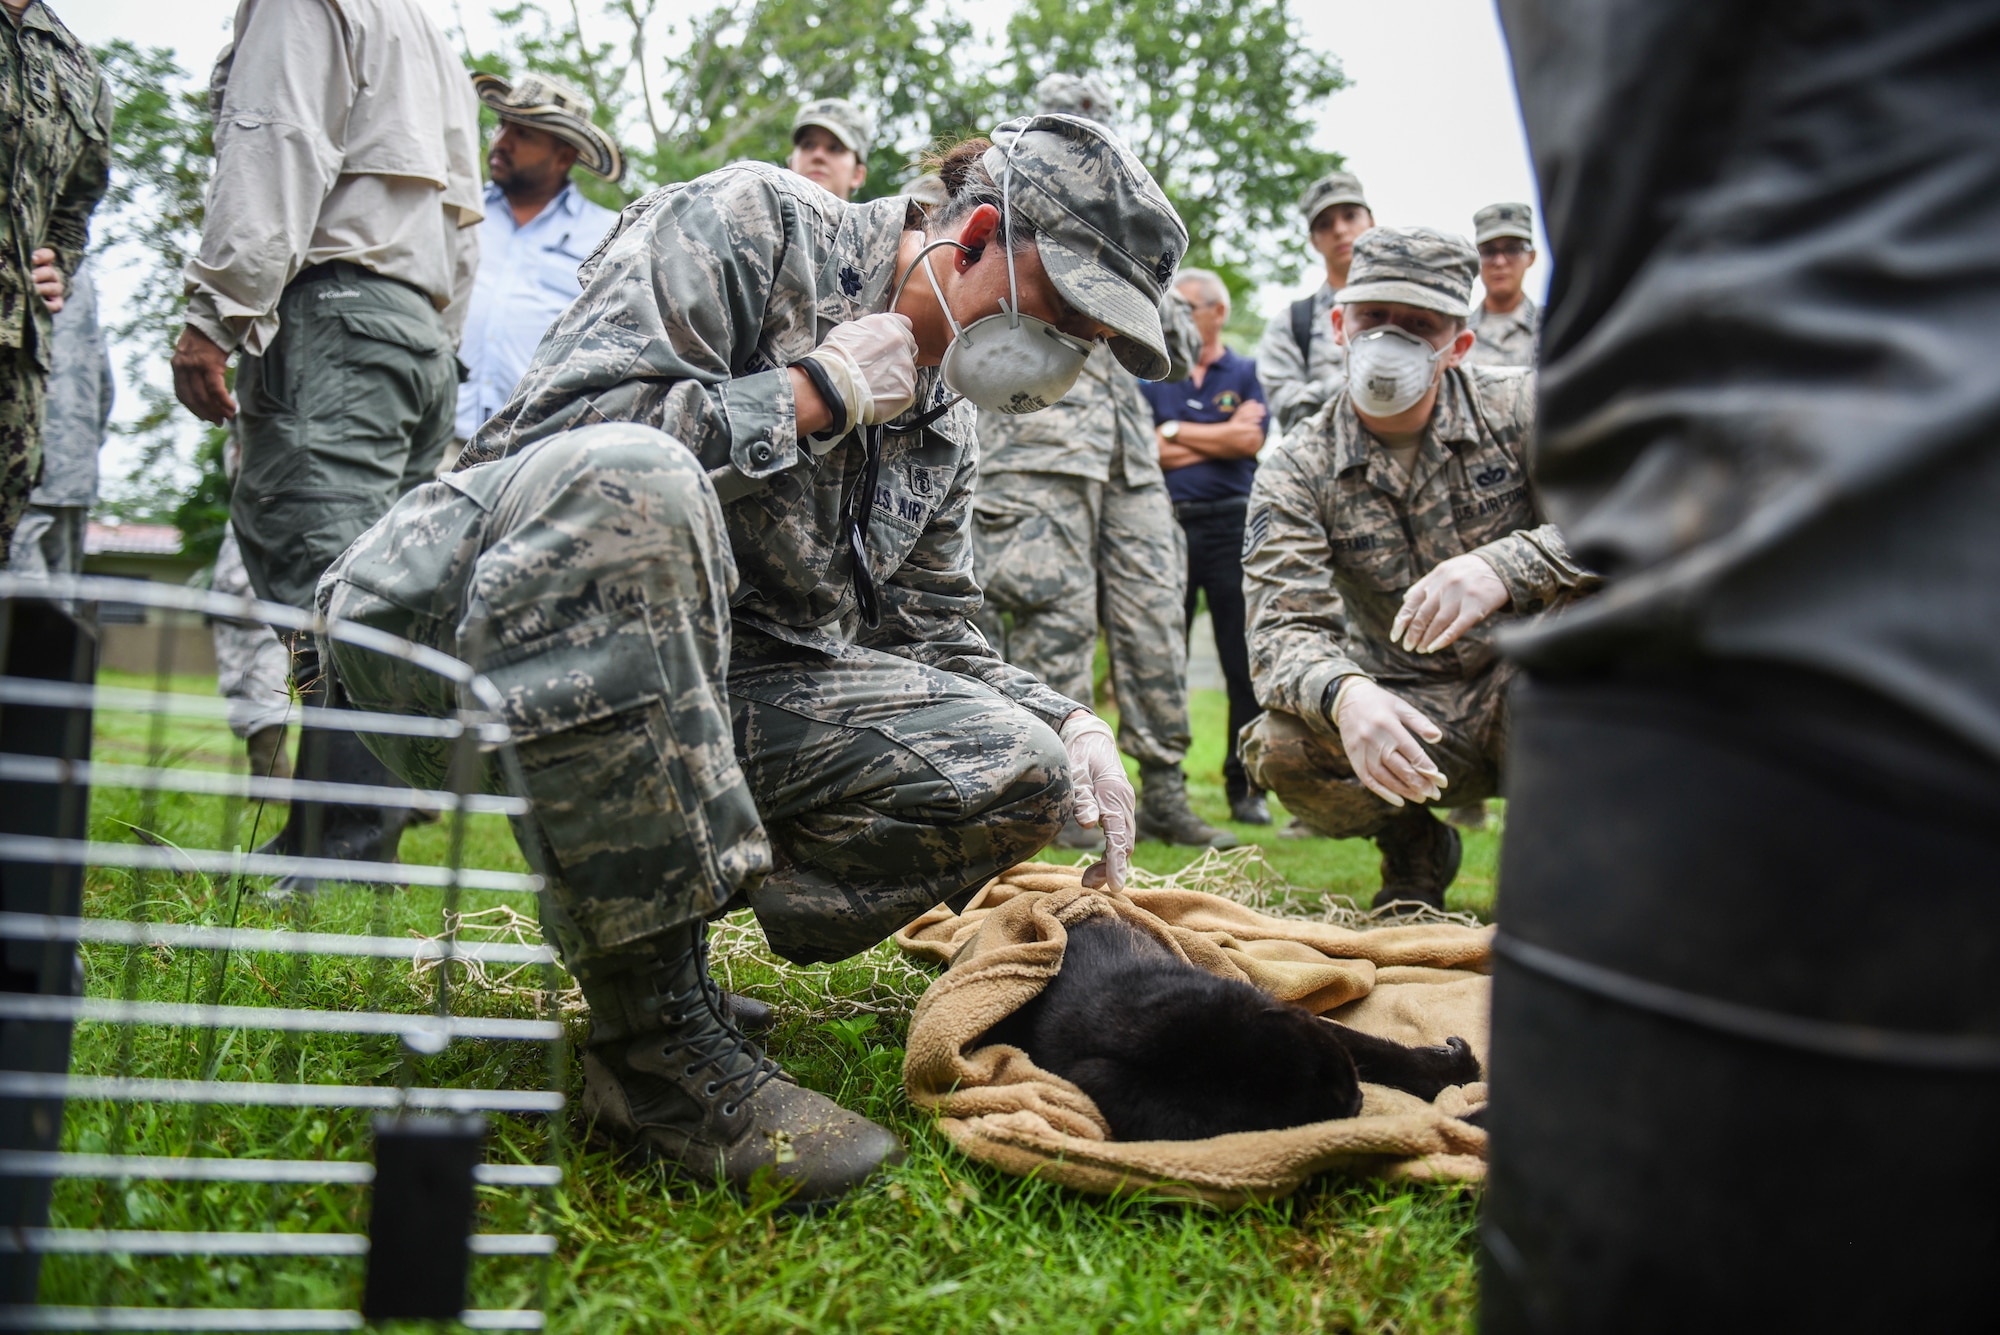 U.S. Air Force Lt. Col. Kelly Gambino-Shirley, 346th Expeditionary Medical Operations Squadron public health officer, deployed from Wright-Patterson Air Force Base in Ohio, checks the vital signs of a monkey in Meteti, Panama, June 6, 2018, during an Emerging Infectious Diseases Training Event as part of Exercise New Horizons 2018. (U.S. Air Force photo by Senior Airman Dustin Mullen)